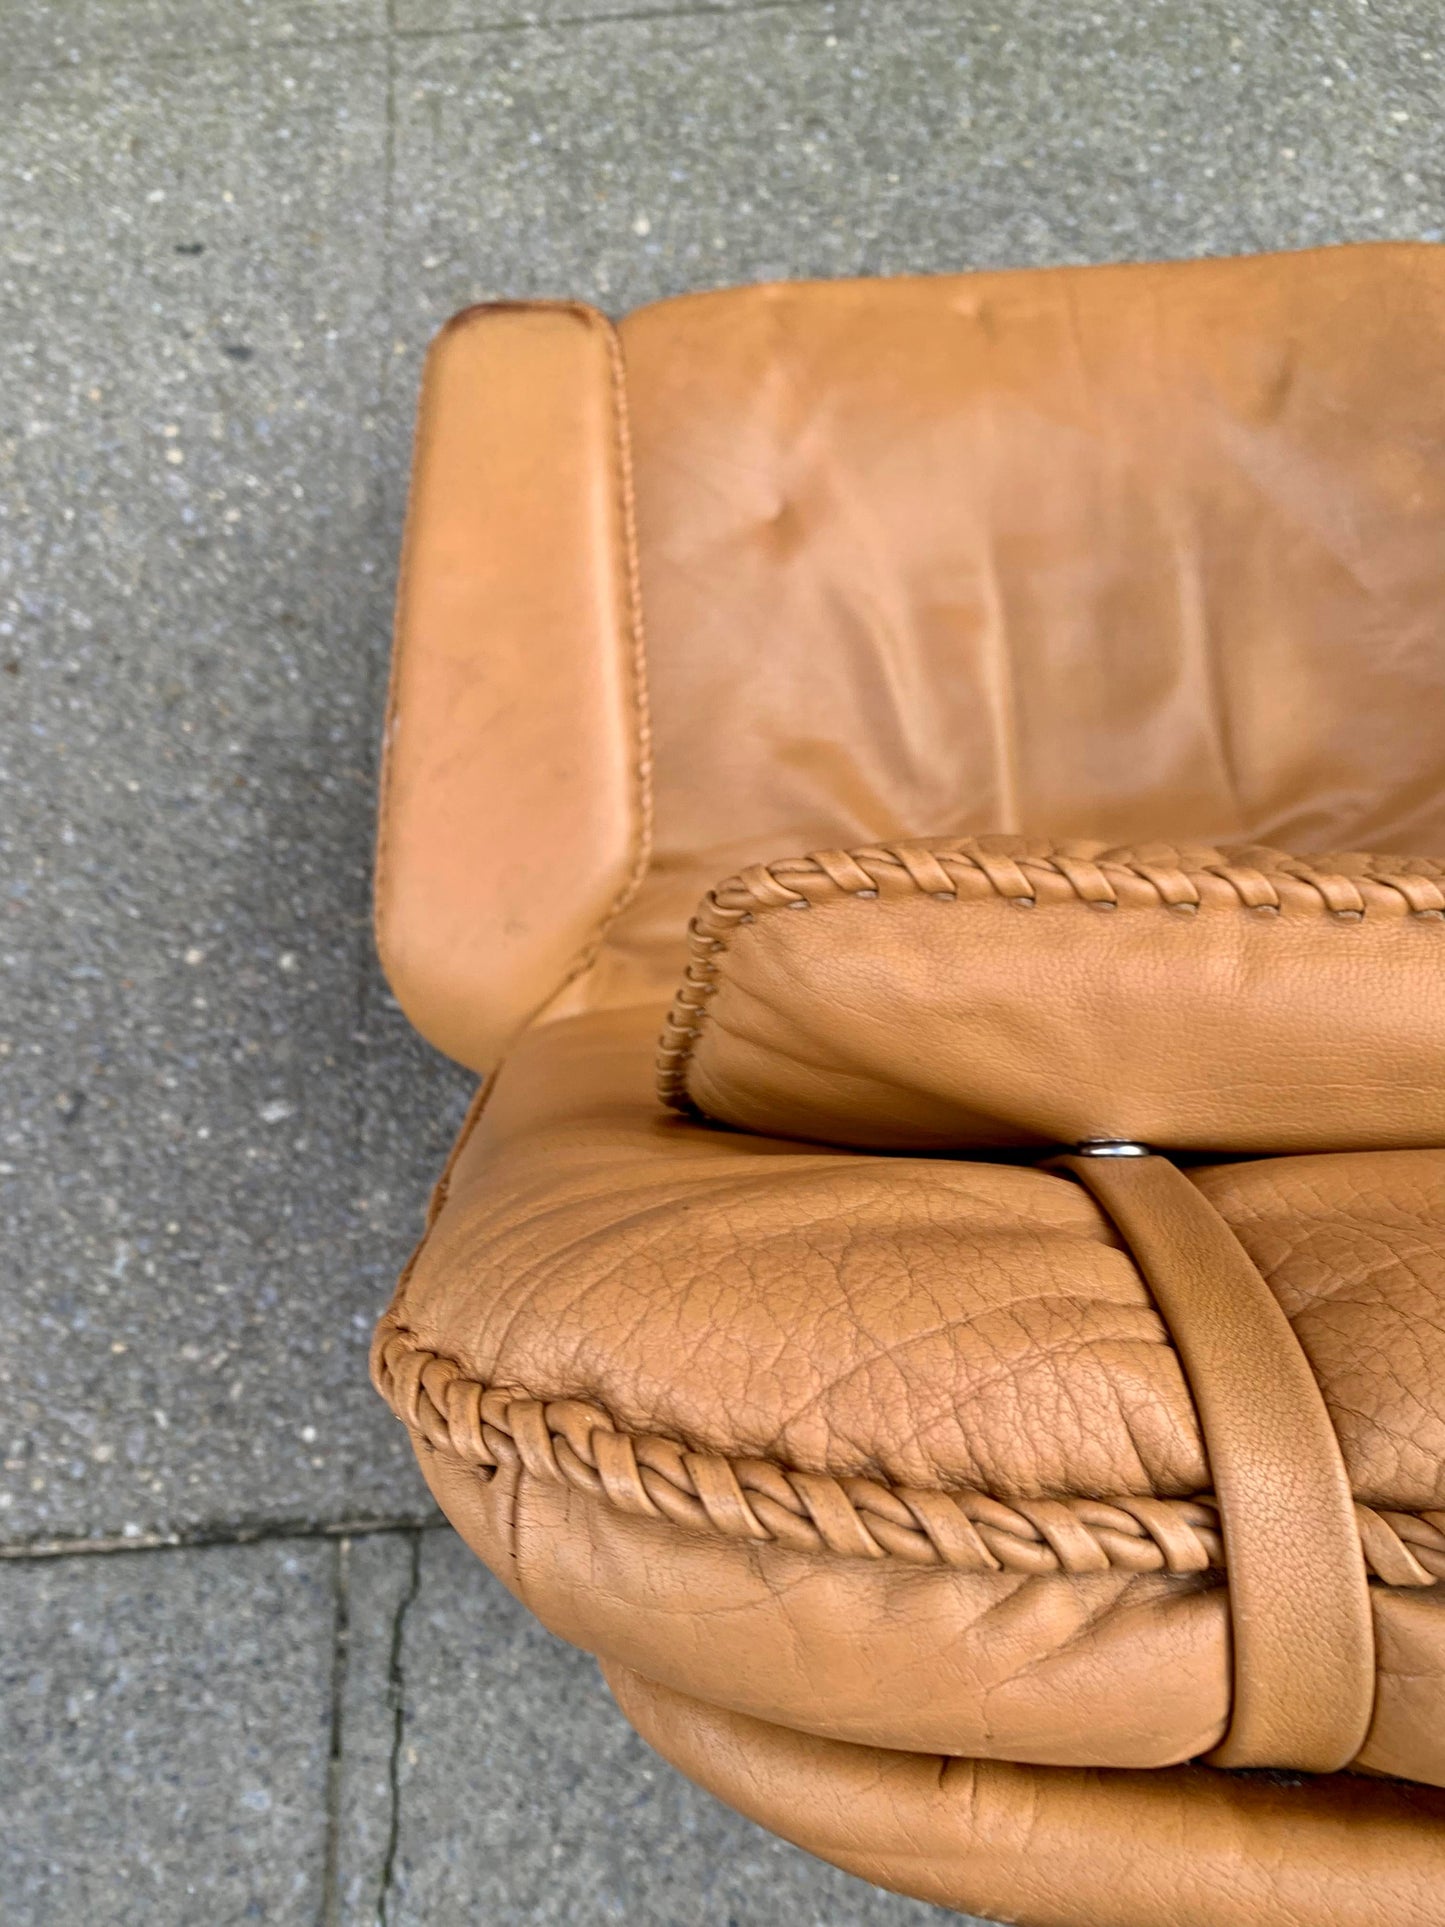 Danish Buffalo Leather Adjustable Armchair by M&s Mobler, 1960s